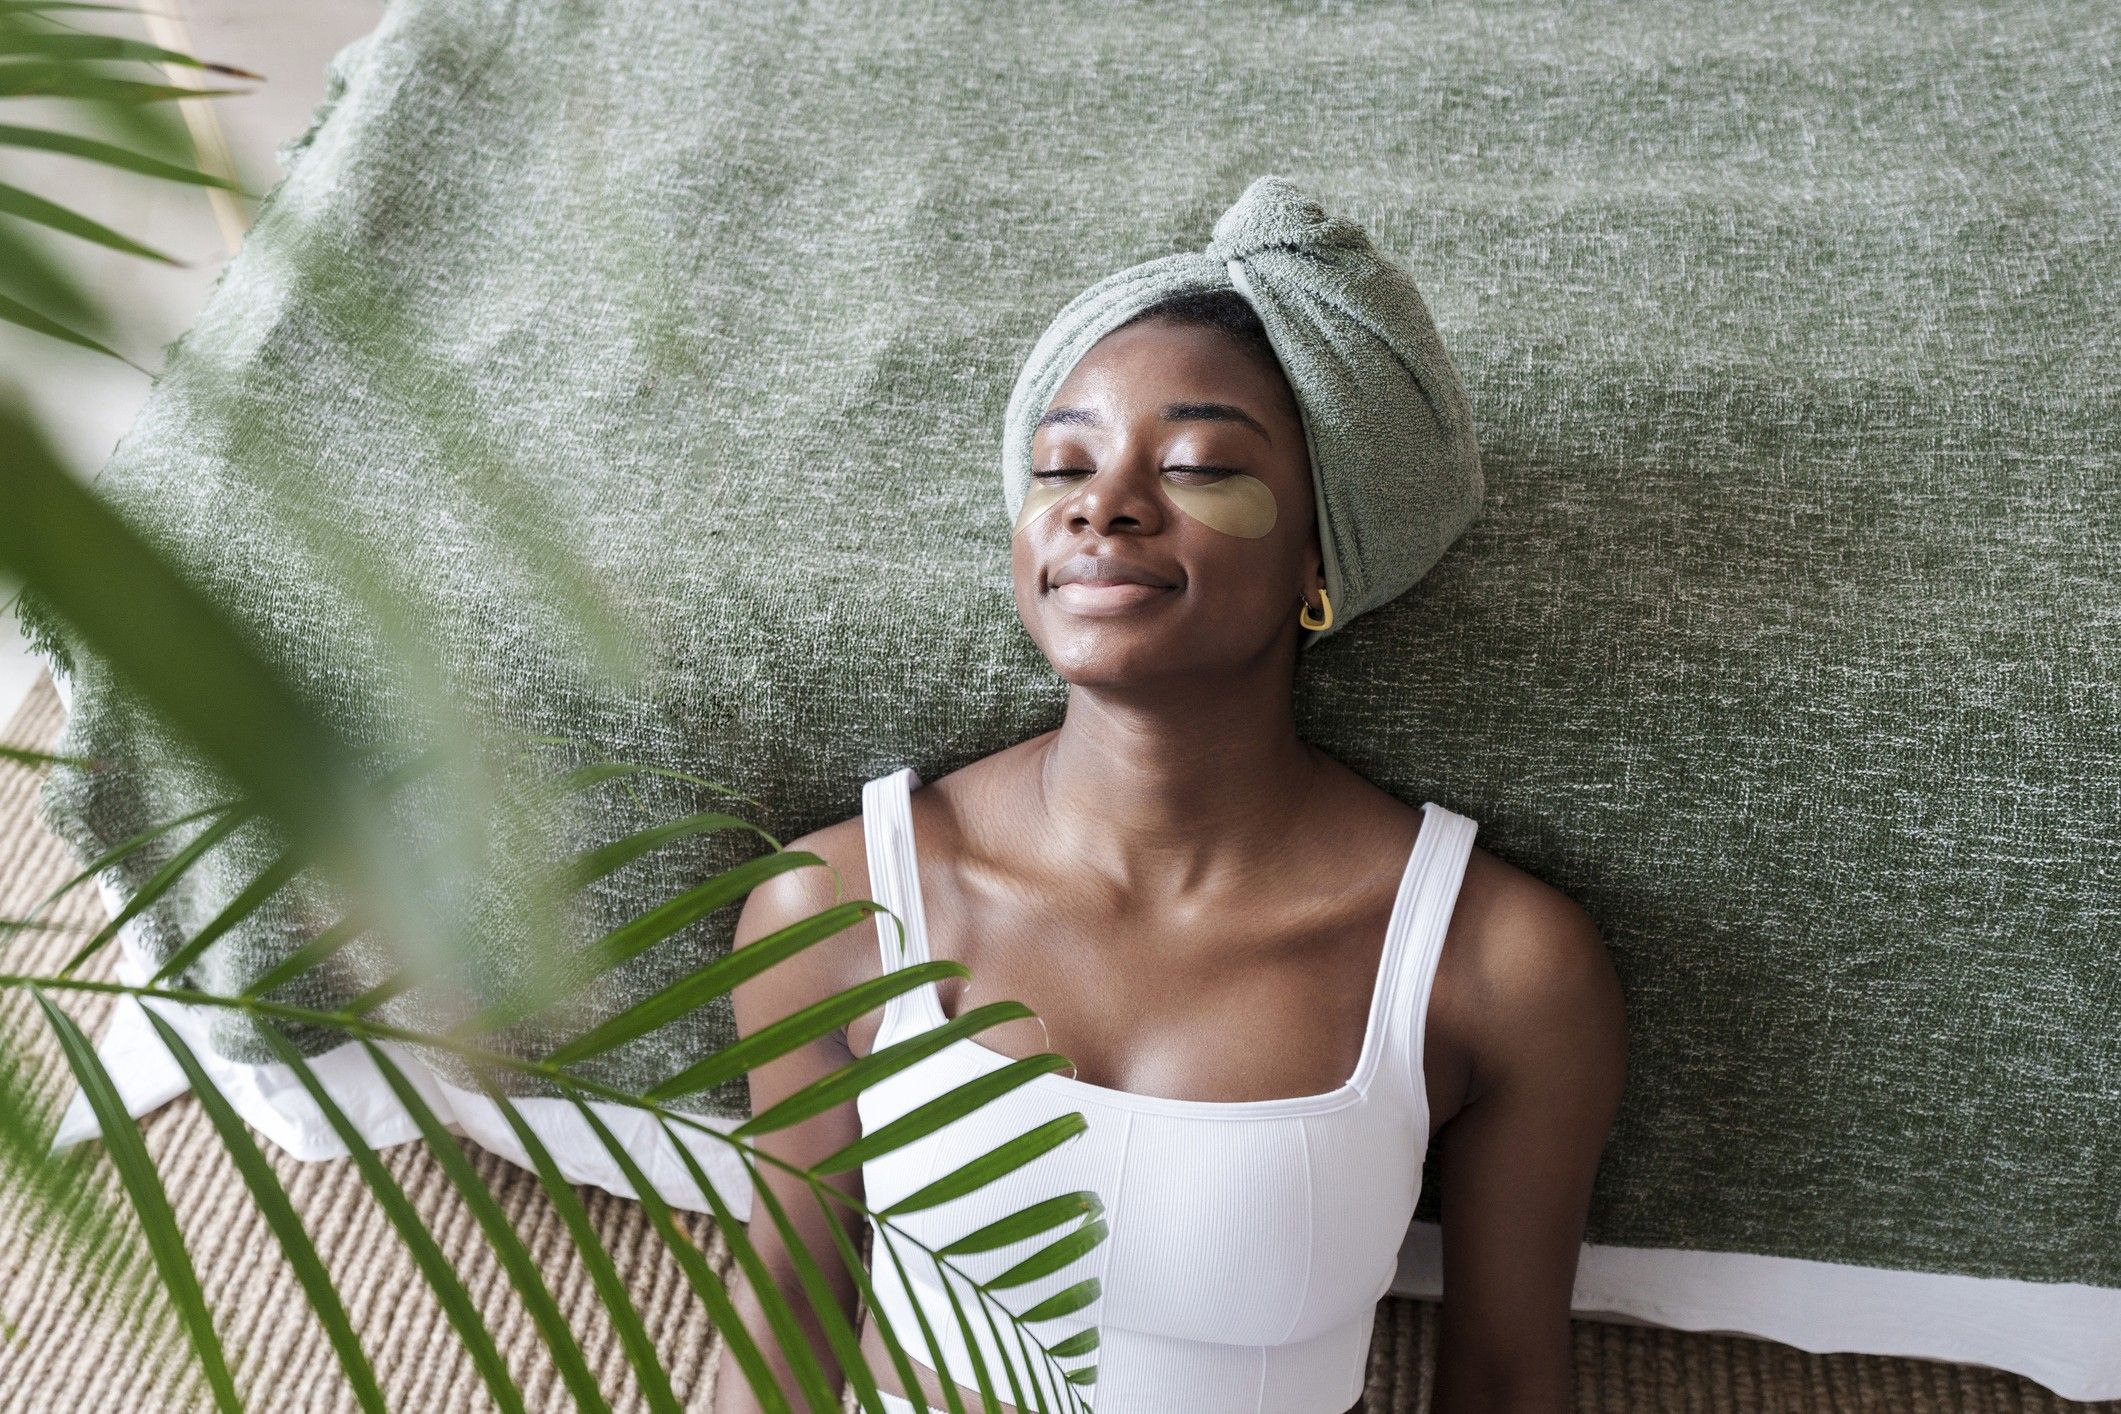 Black-woman-doing-skincare-treatment-at-home-leaning-against-bed